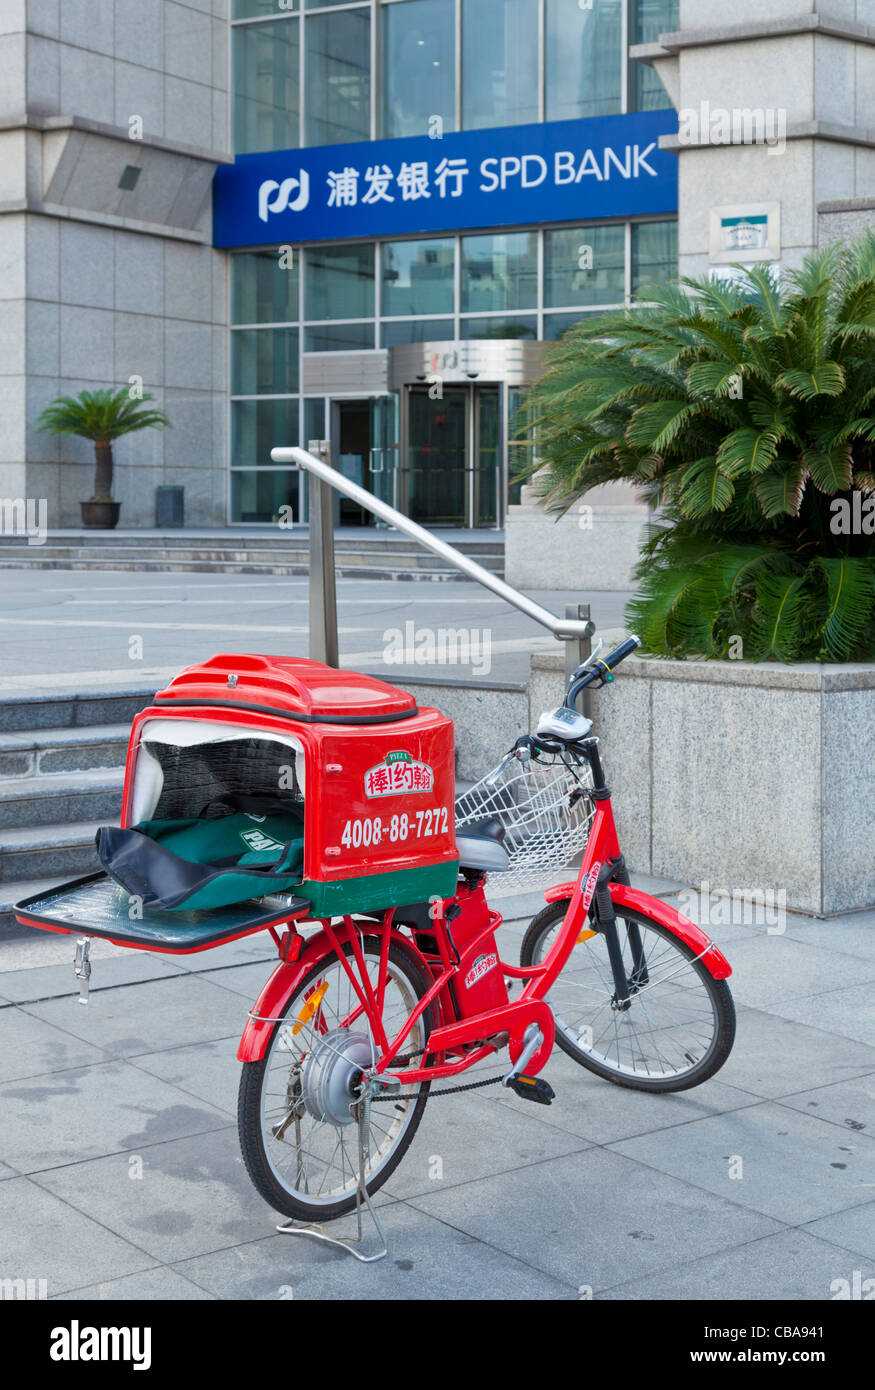 Pizza delivery bicycle at a Shanghai pudong Bank SPD Bank PRC, People's Republic of China, Asia Stock Photo